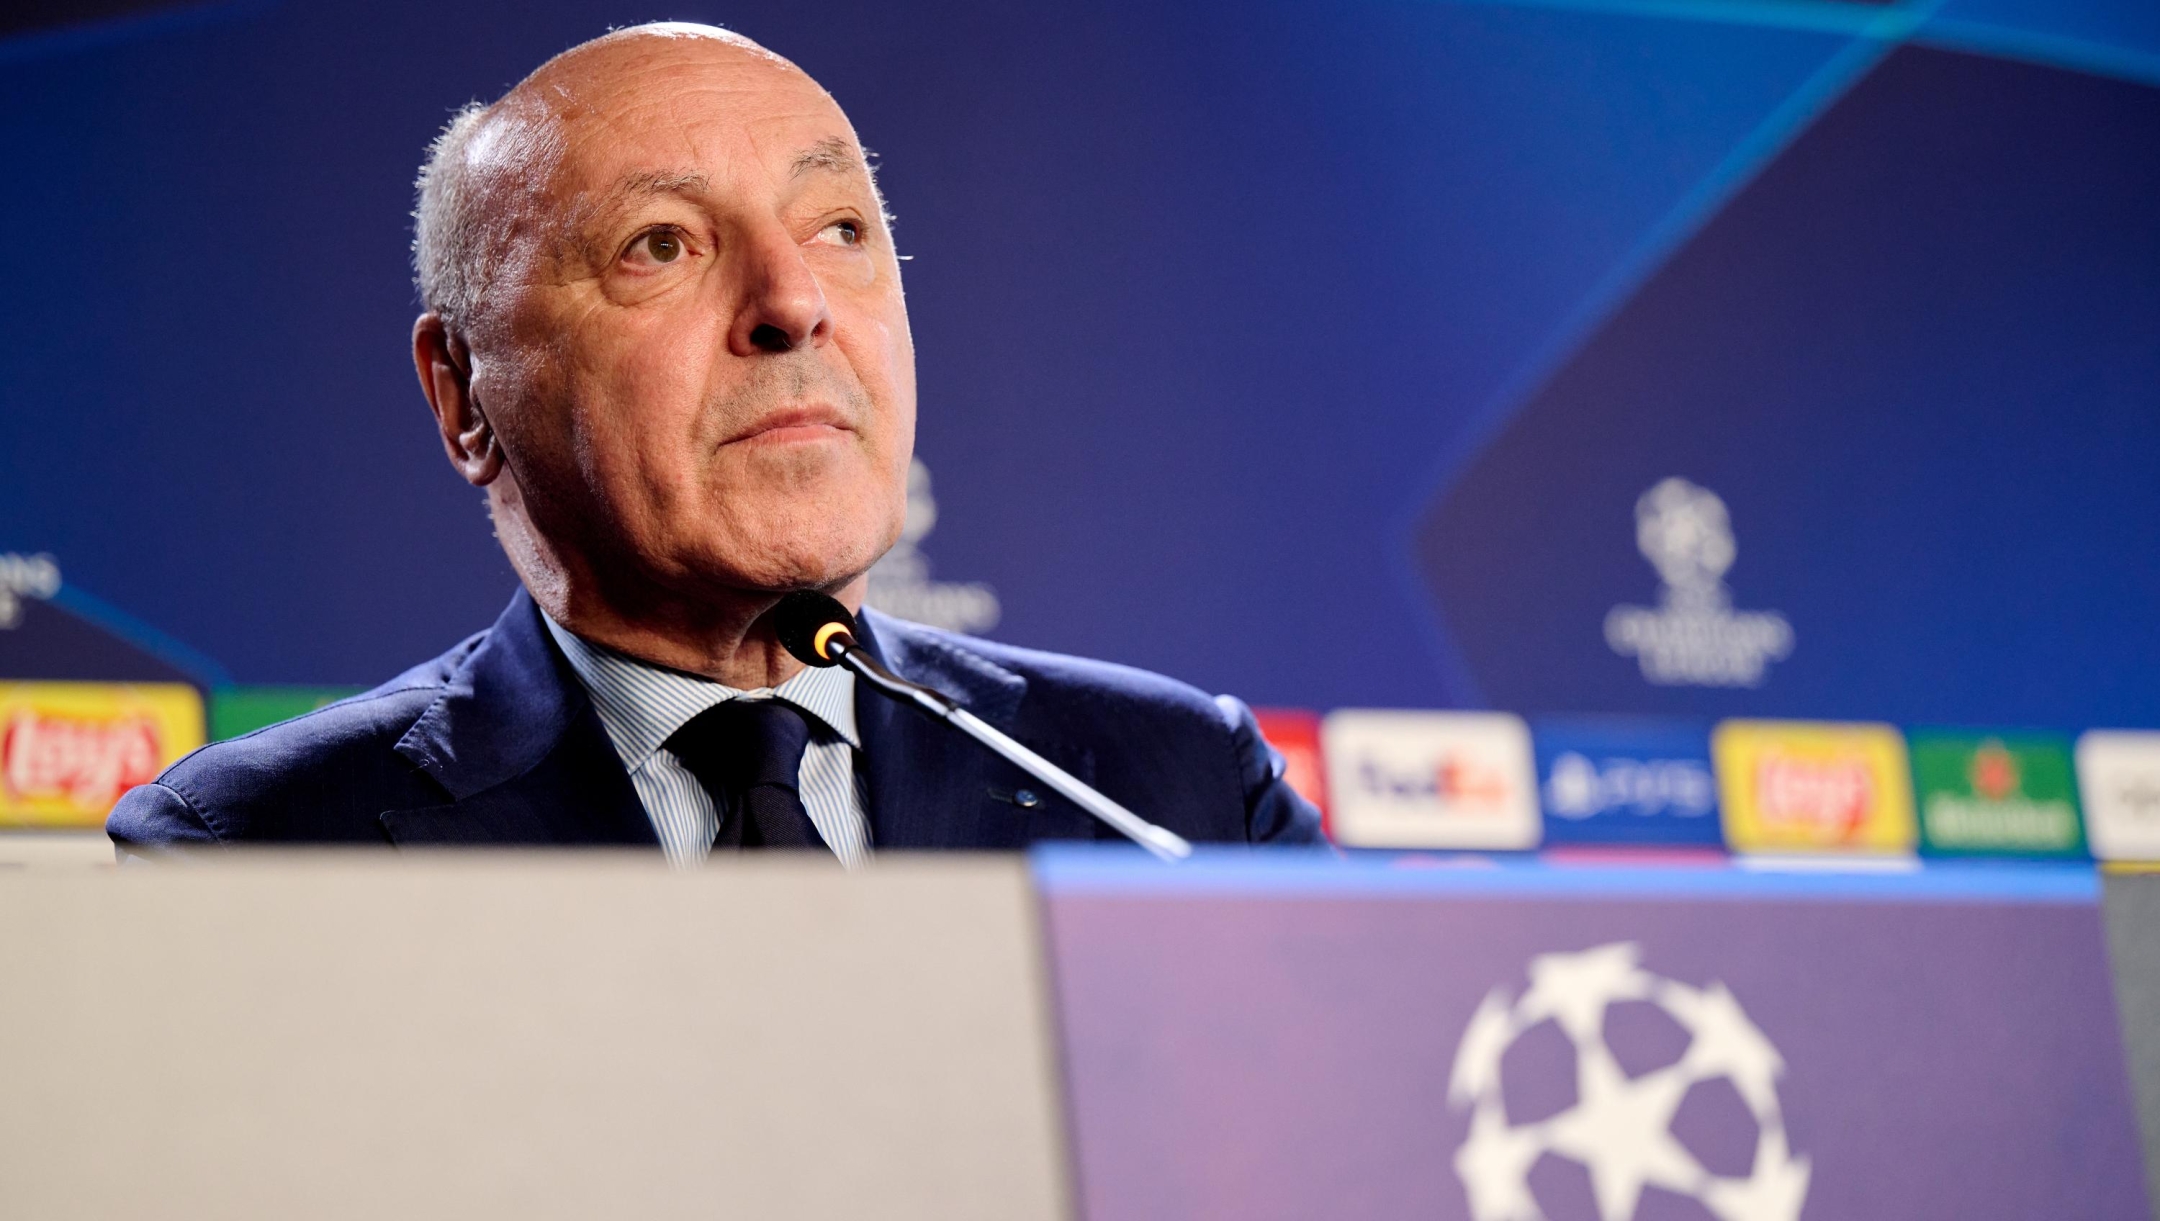 COMO, ITALY - JUNE 05: Sport CEO Giuseppe Marotta of FC Internazionale speaks with the media during the press conference at UEFA Campions League Final media day at Appiano Gentile on June 05, 2023 in Como, Italy. (Photo by Mattia Ozbot - Inter/Inter via Getty Images)